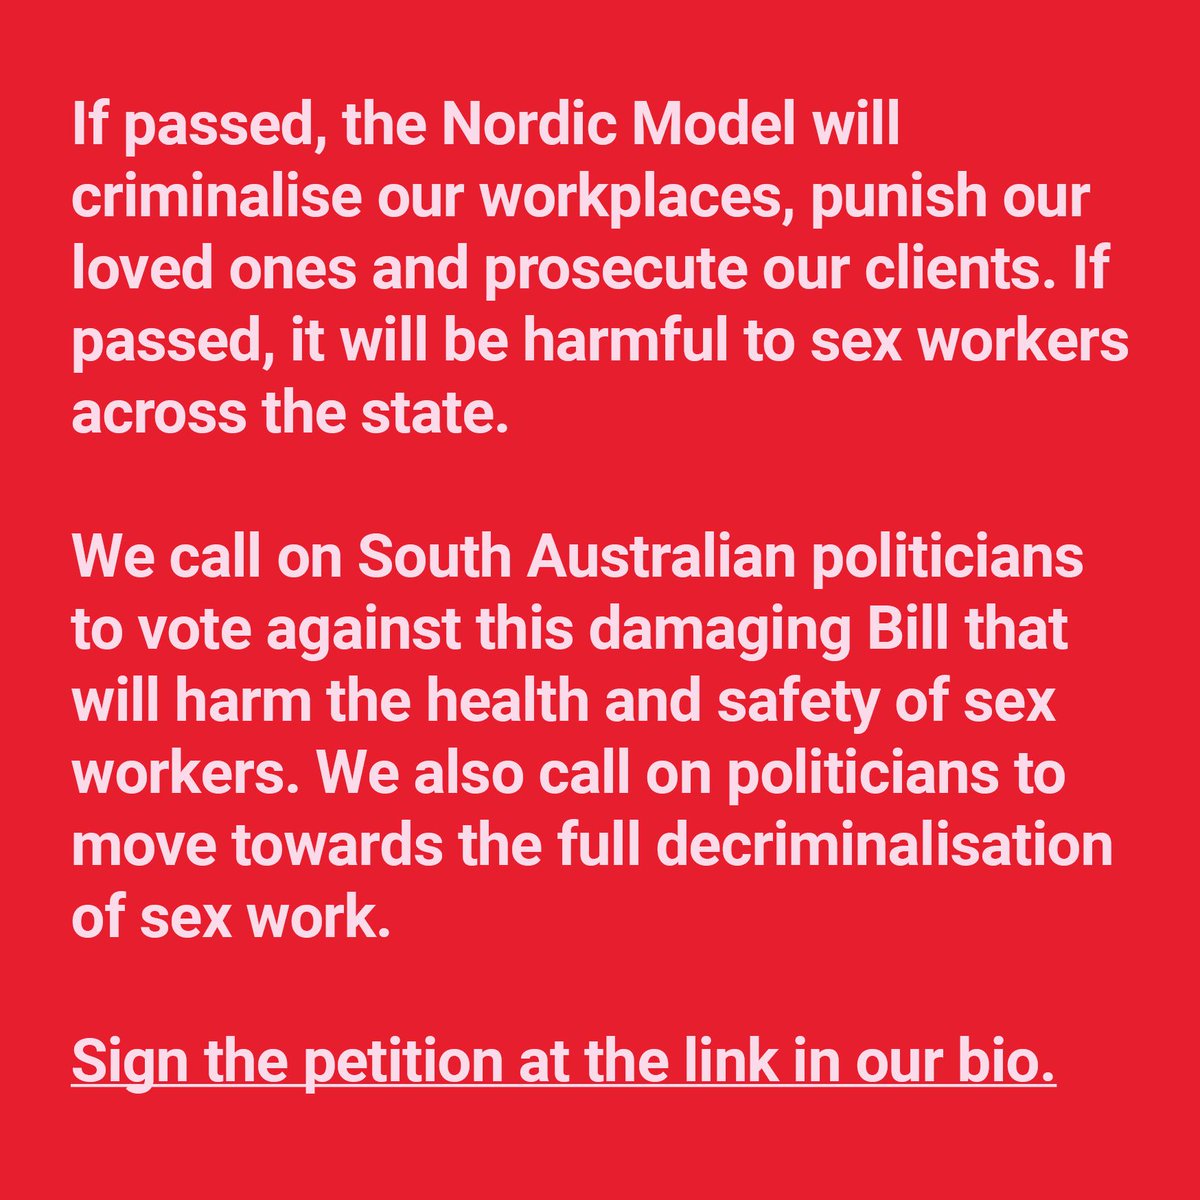 We call on South Australian politicians to vote against this damaging Bill that will harm the health and safety of sex workers. We also call on politicians to move towards the full decriminalisation of sex work. Sign the petition: bit.ly/3UGZEkC